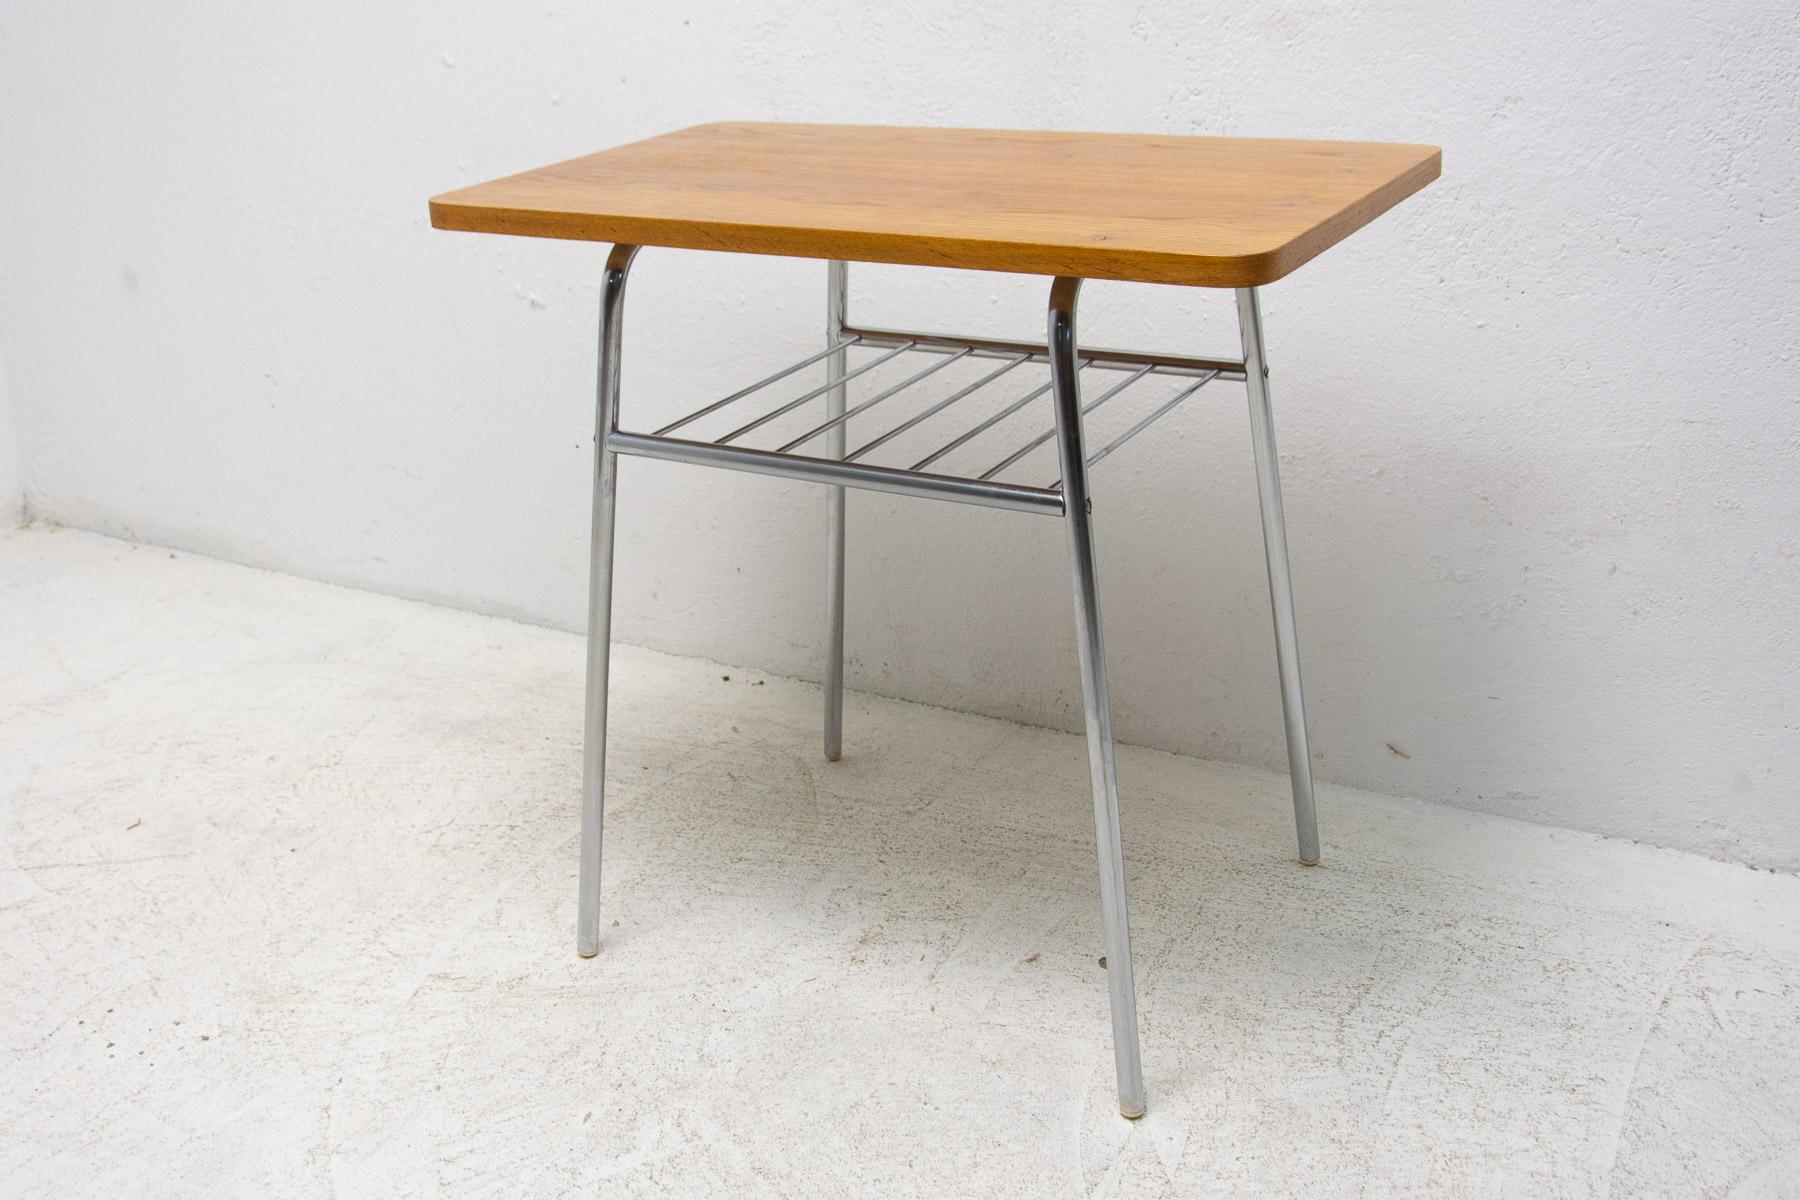 It was made in the 1950´s in the former Czechoslovakia.

The table has a chrome-plated metal base with storage space and a beech wood table top. It is in excellent condition, fully renovated.

Measures: Height: 71 cm

Width: 75 cm

Depth: 45